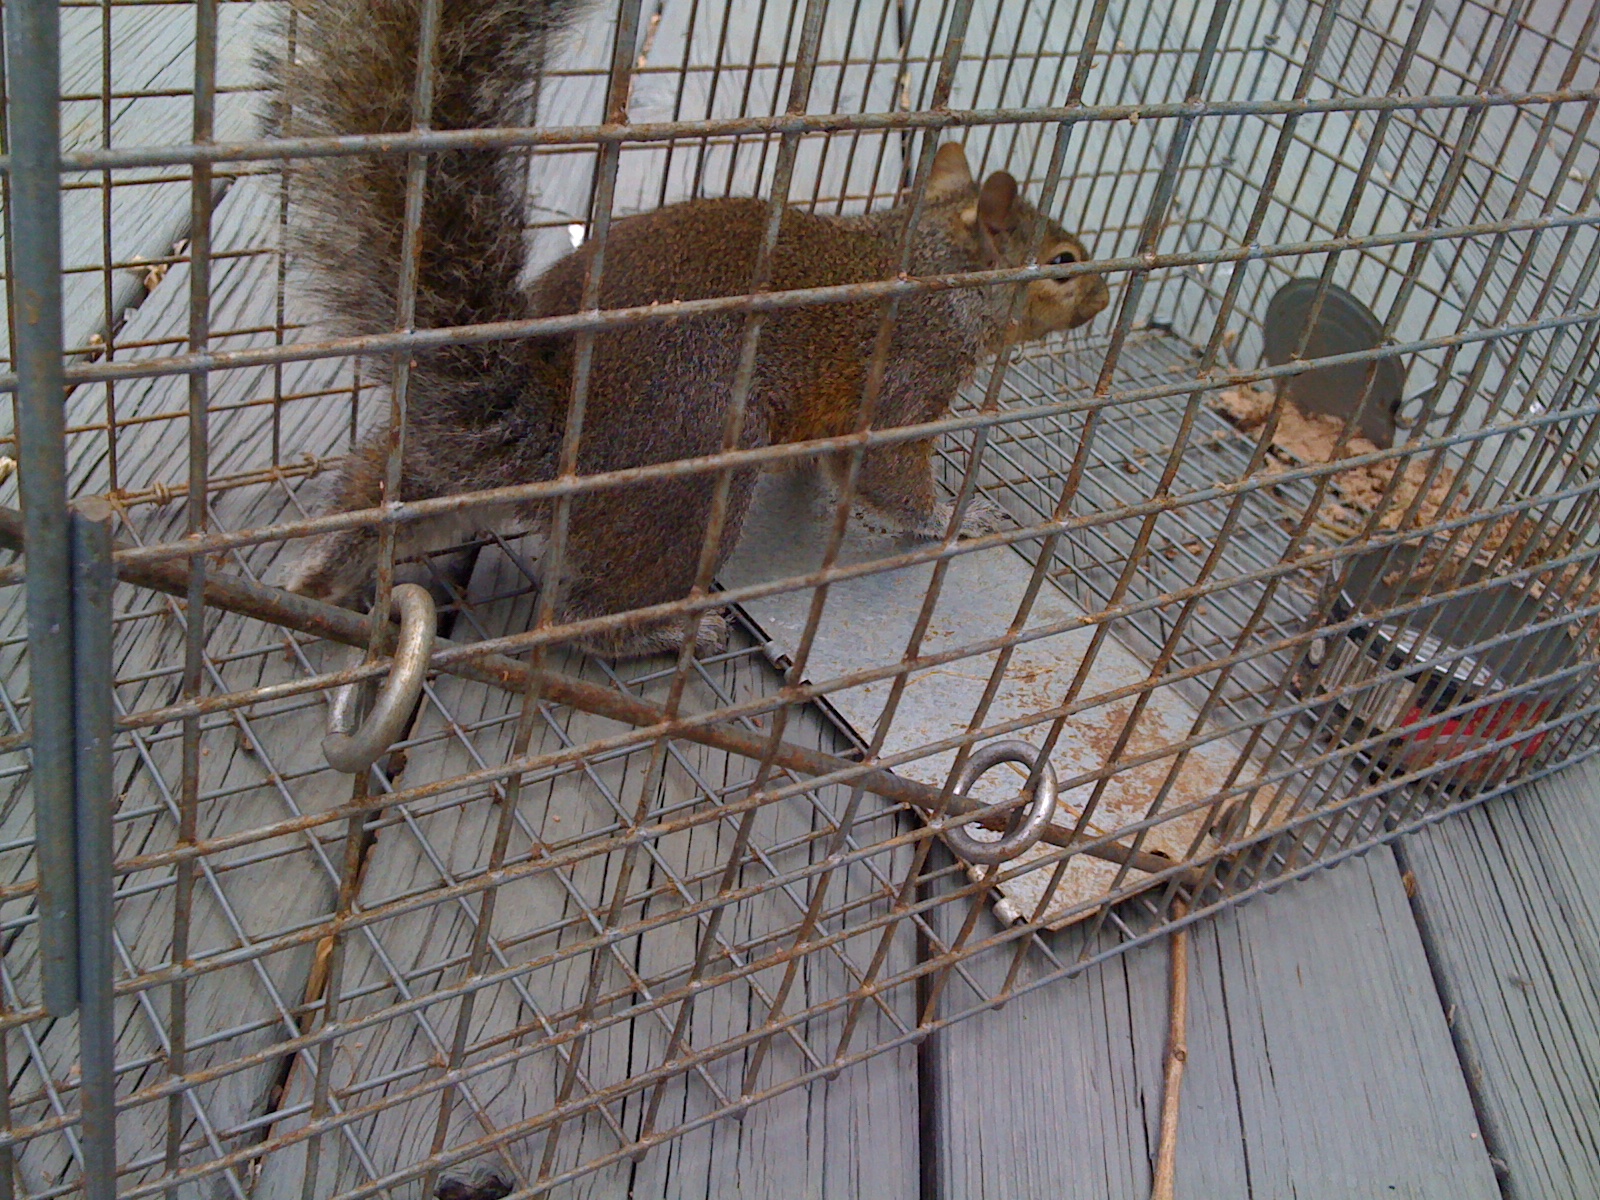 Charlotte Squirrel Removal Squirrel Removal From Attic